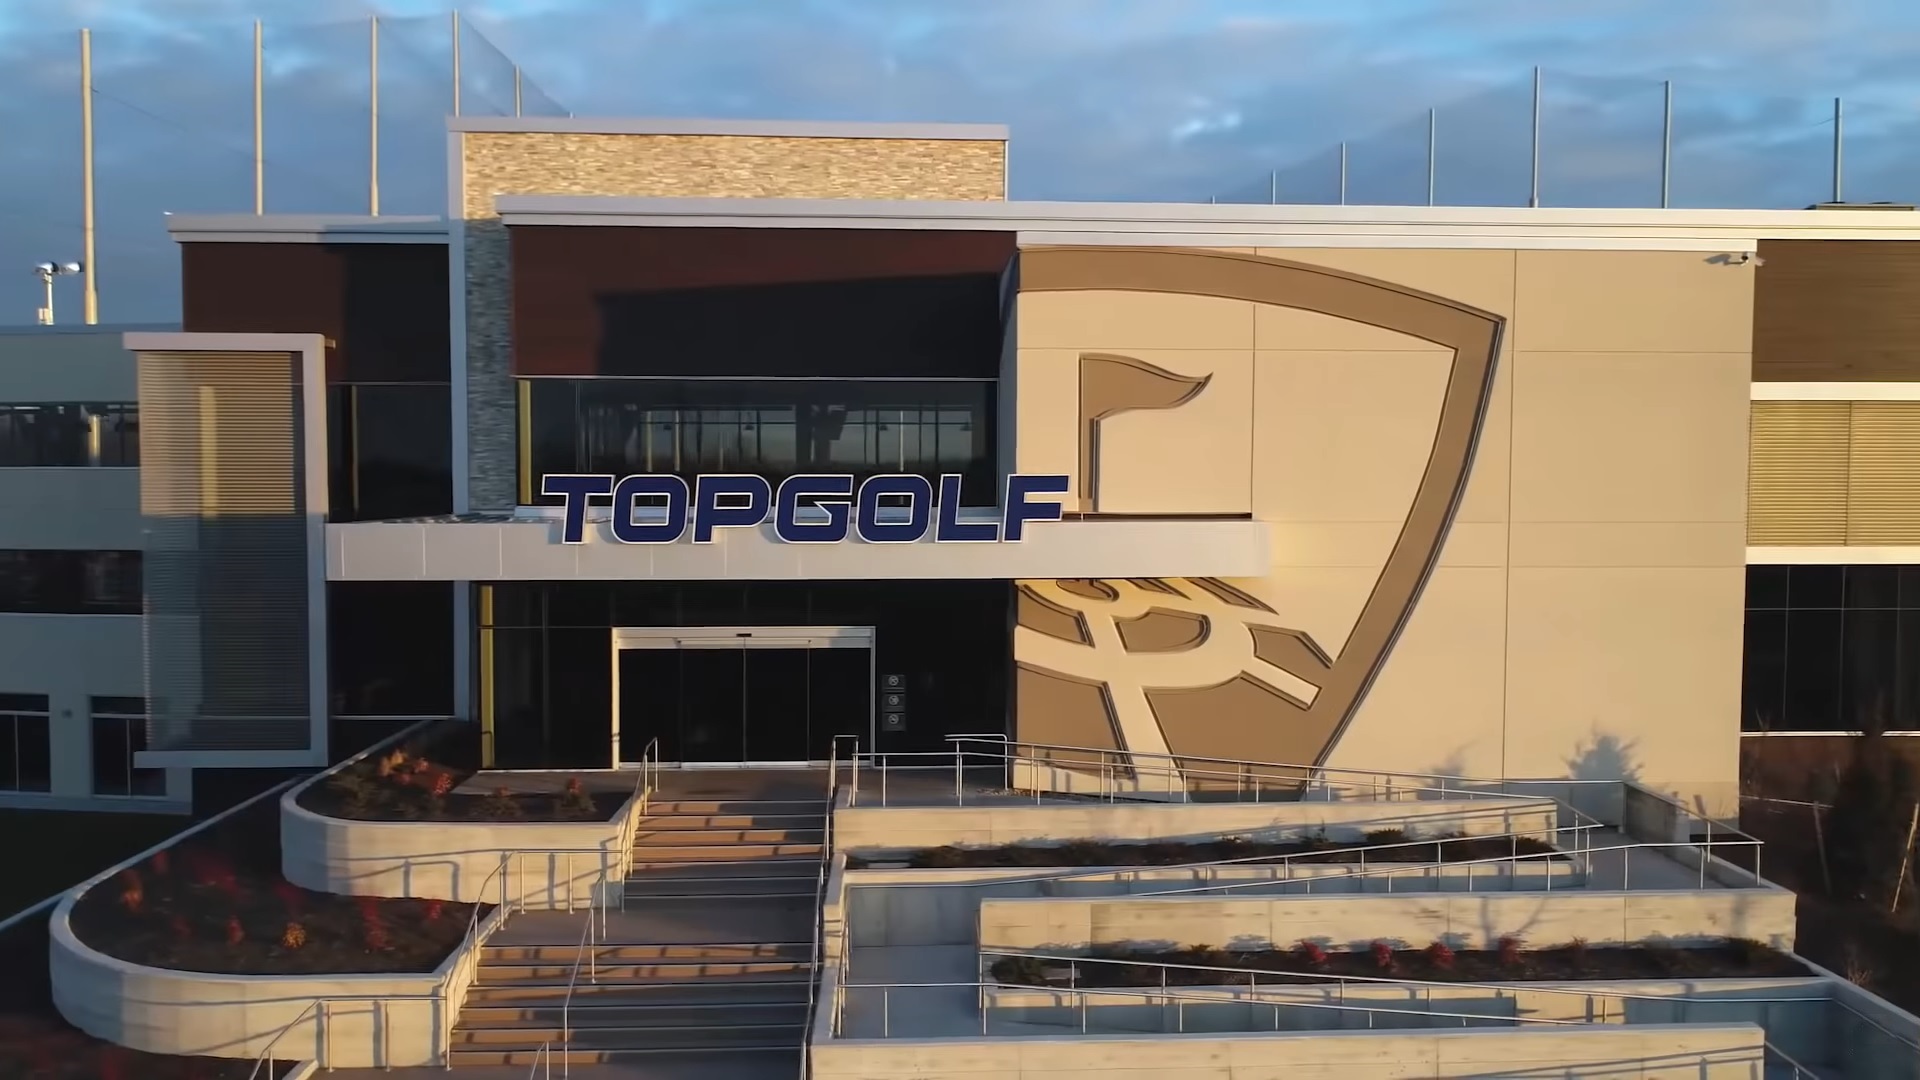 Topgolf 10 minutes drive to the east of North Texas Smiles Pediatric Dentistry & Orthodontics